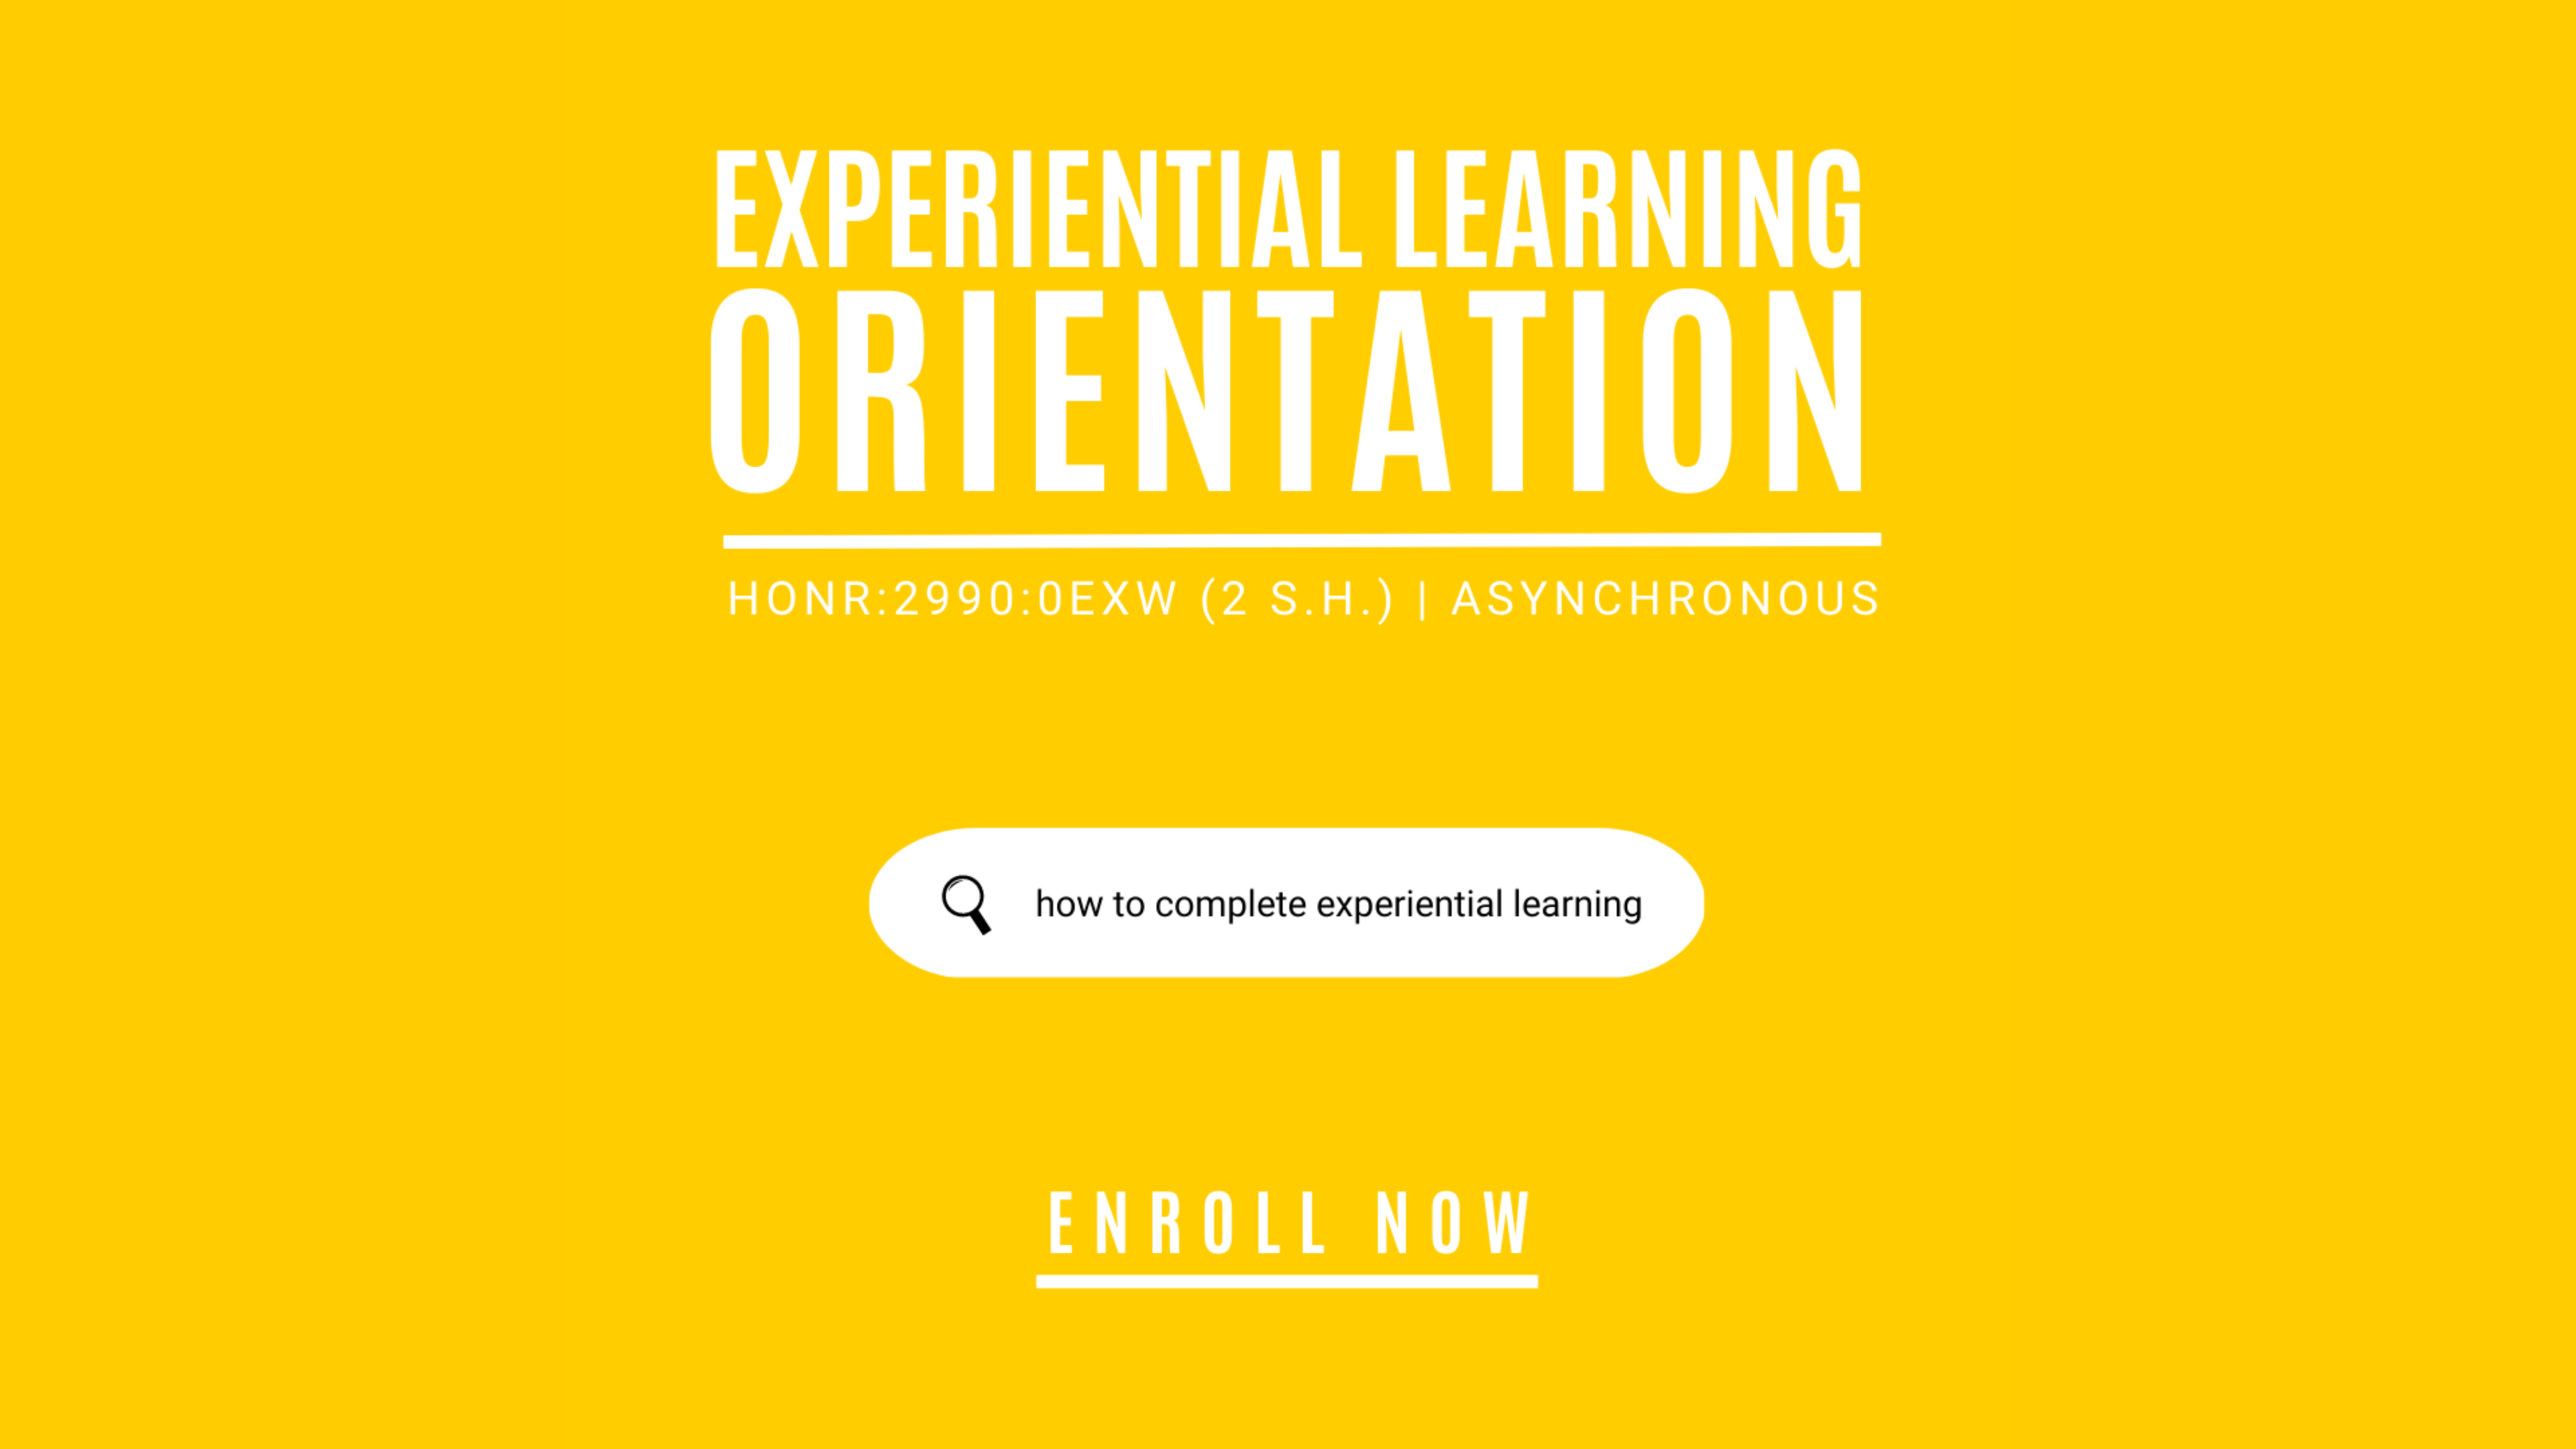 Experiential Learning Orientation is a new course being offered Fall 2023. It will provide Honors students with an introduction to experiential learning, as well as skills important to any career, such as metacognitive reflection and reflective writing. One goal of experiential learning is to develop expertise in an area of interest by learning by doing, and the class can give students a better idea of how to nurture the development of that expertise. They will also learn about experiential learning opportunities and details on the Honors Program’s process regarding it.  